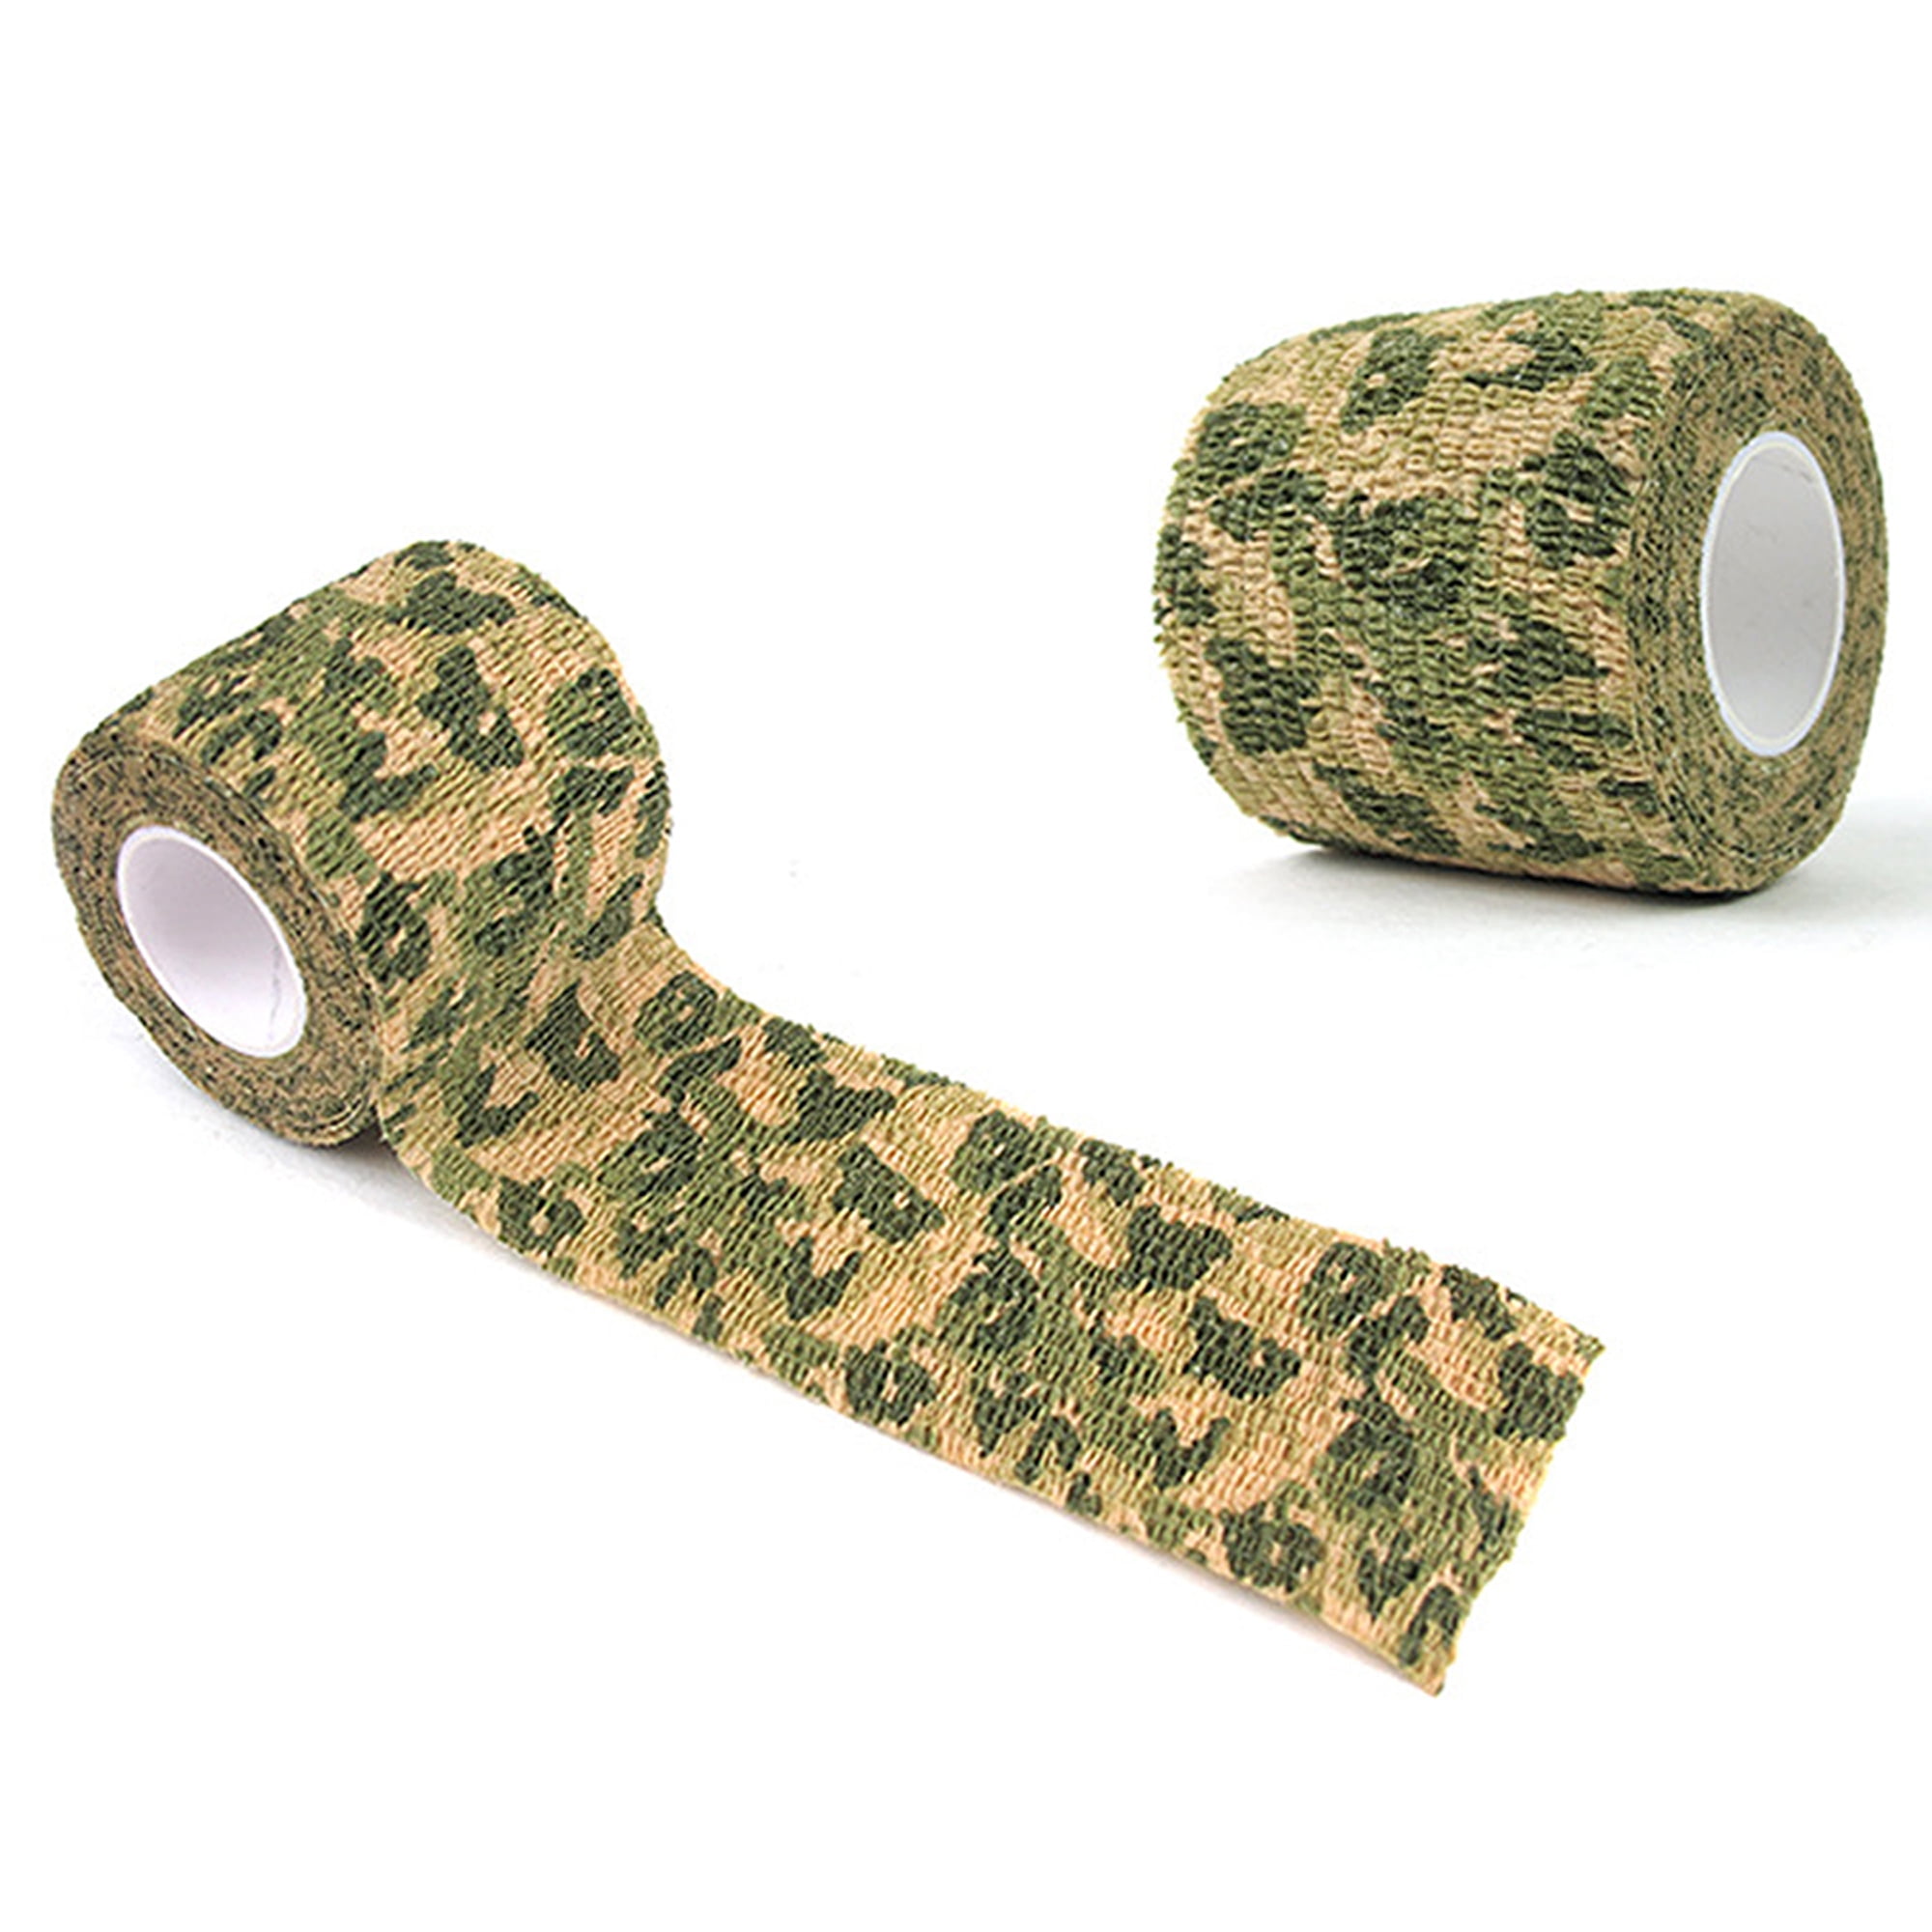 Waterproof Camouflage Duct tape Tactical Outdoor Hunting tool Stretch bandage 